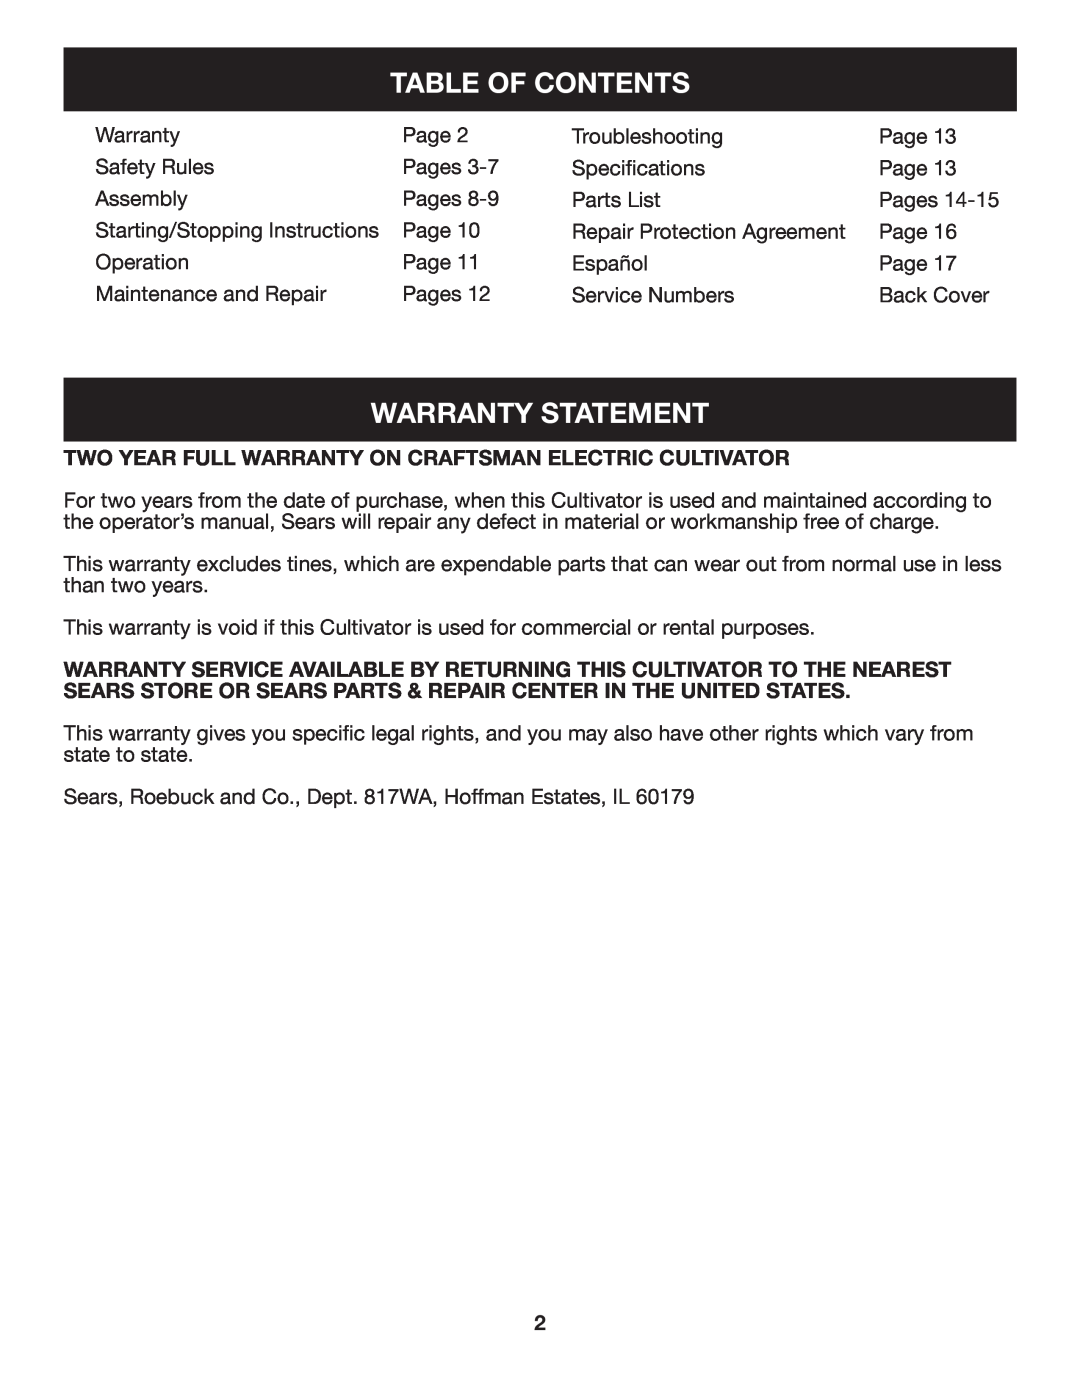 Craftsman 316.2926 manual Table Of Contents, Warranty Statement 